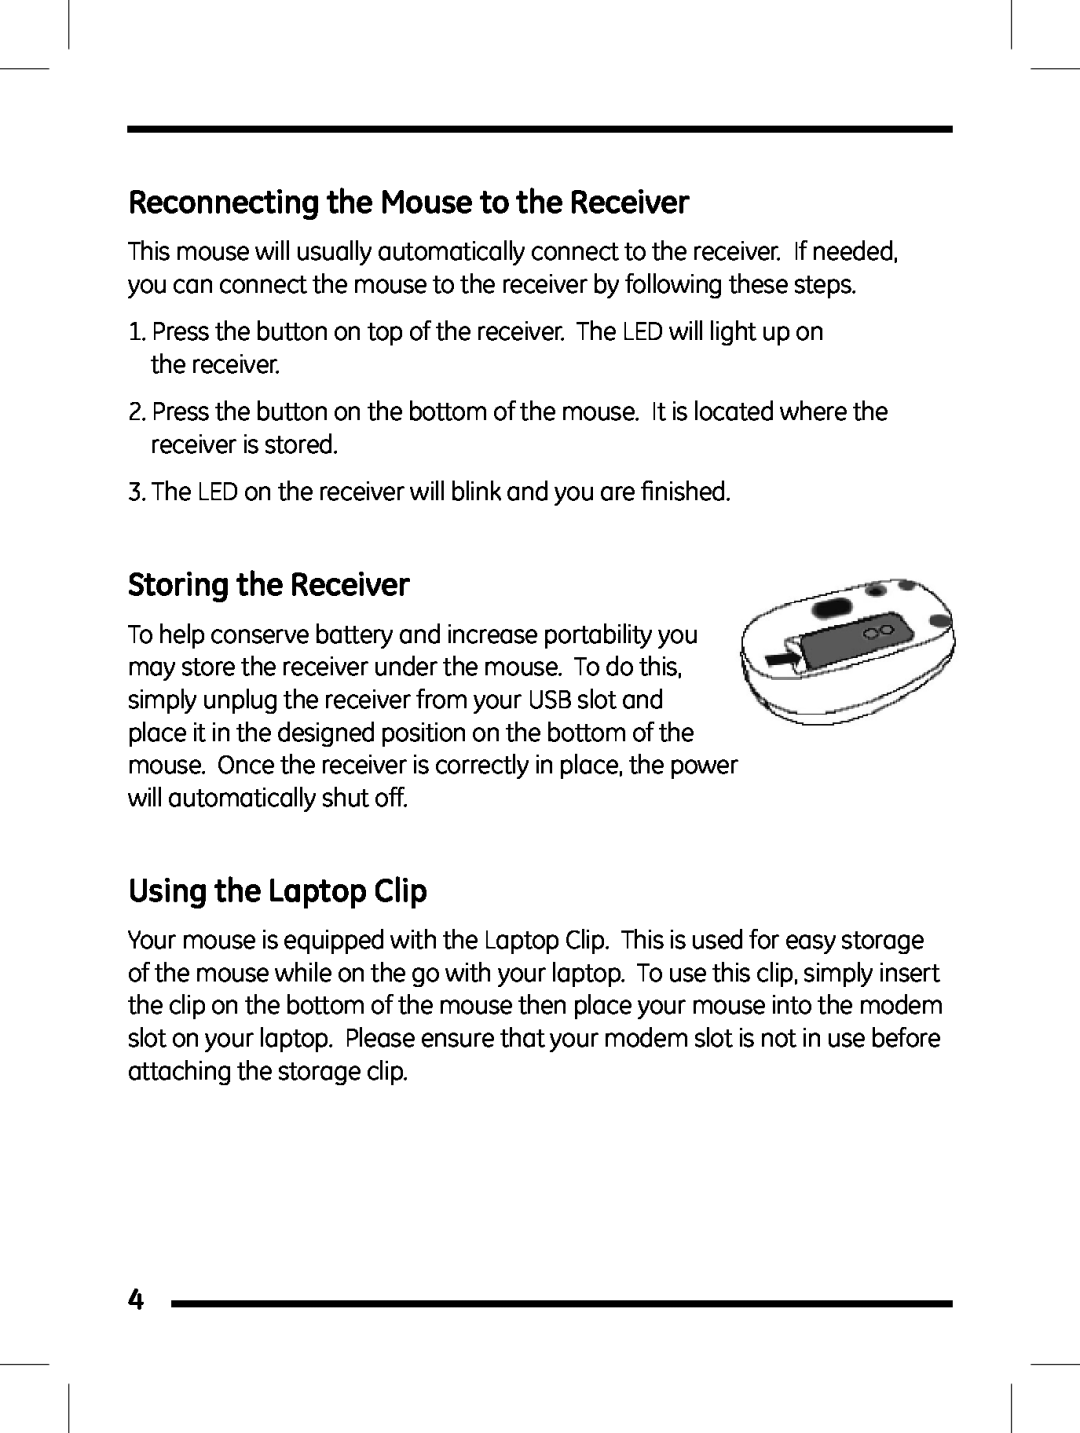 Jasco 98505 instruction manual Reconnecting the Mouse to the Receiver, Storing the Receiver, Using the Laptop Clip 